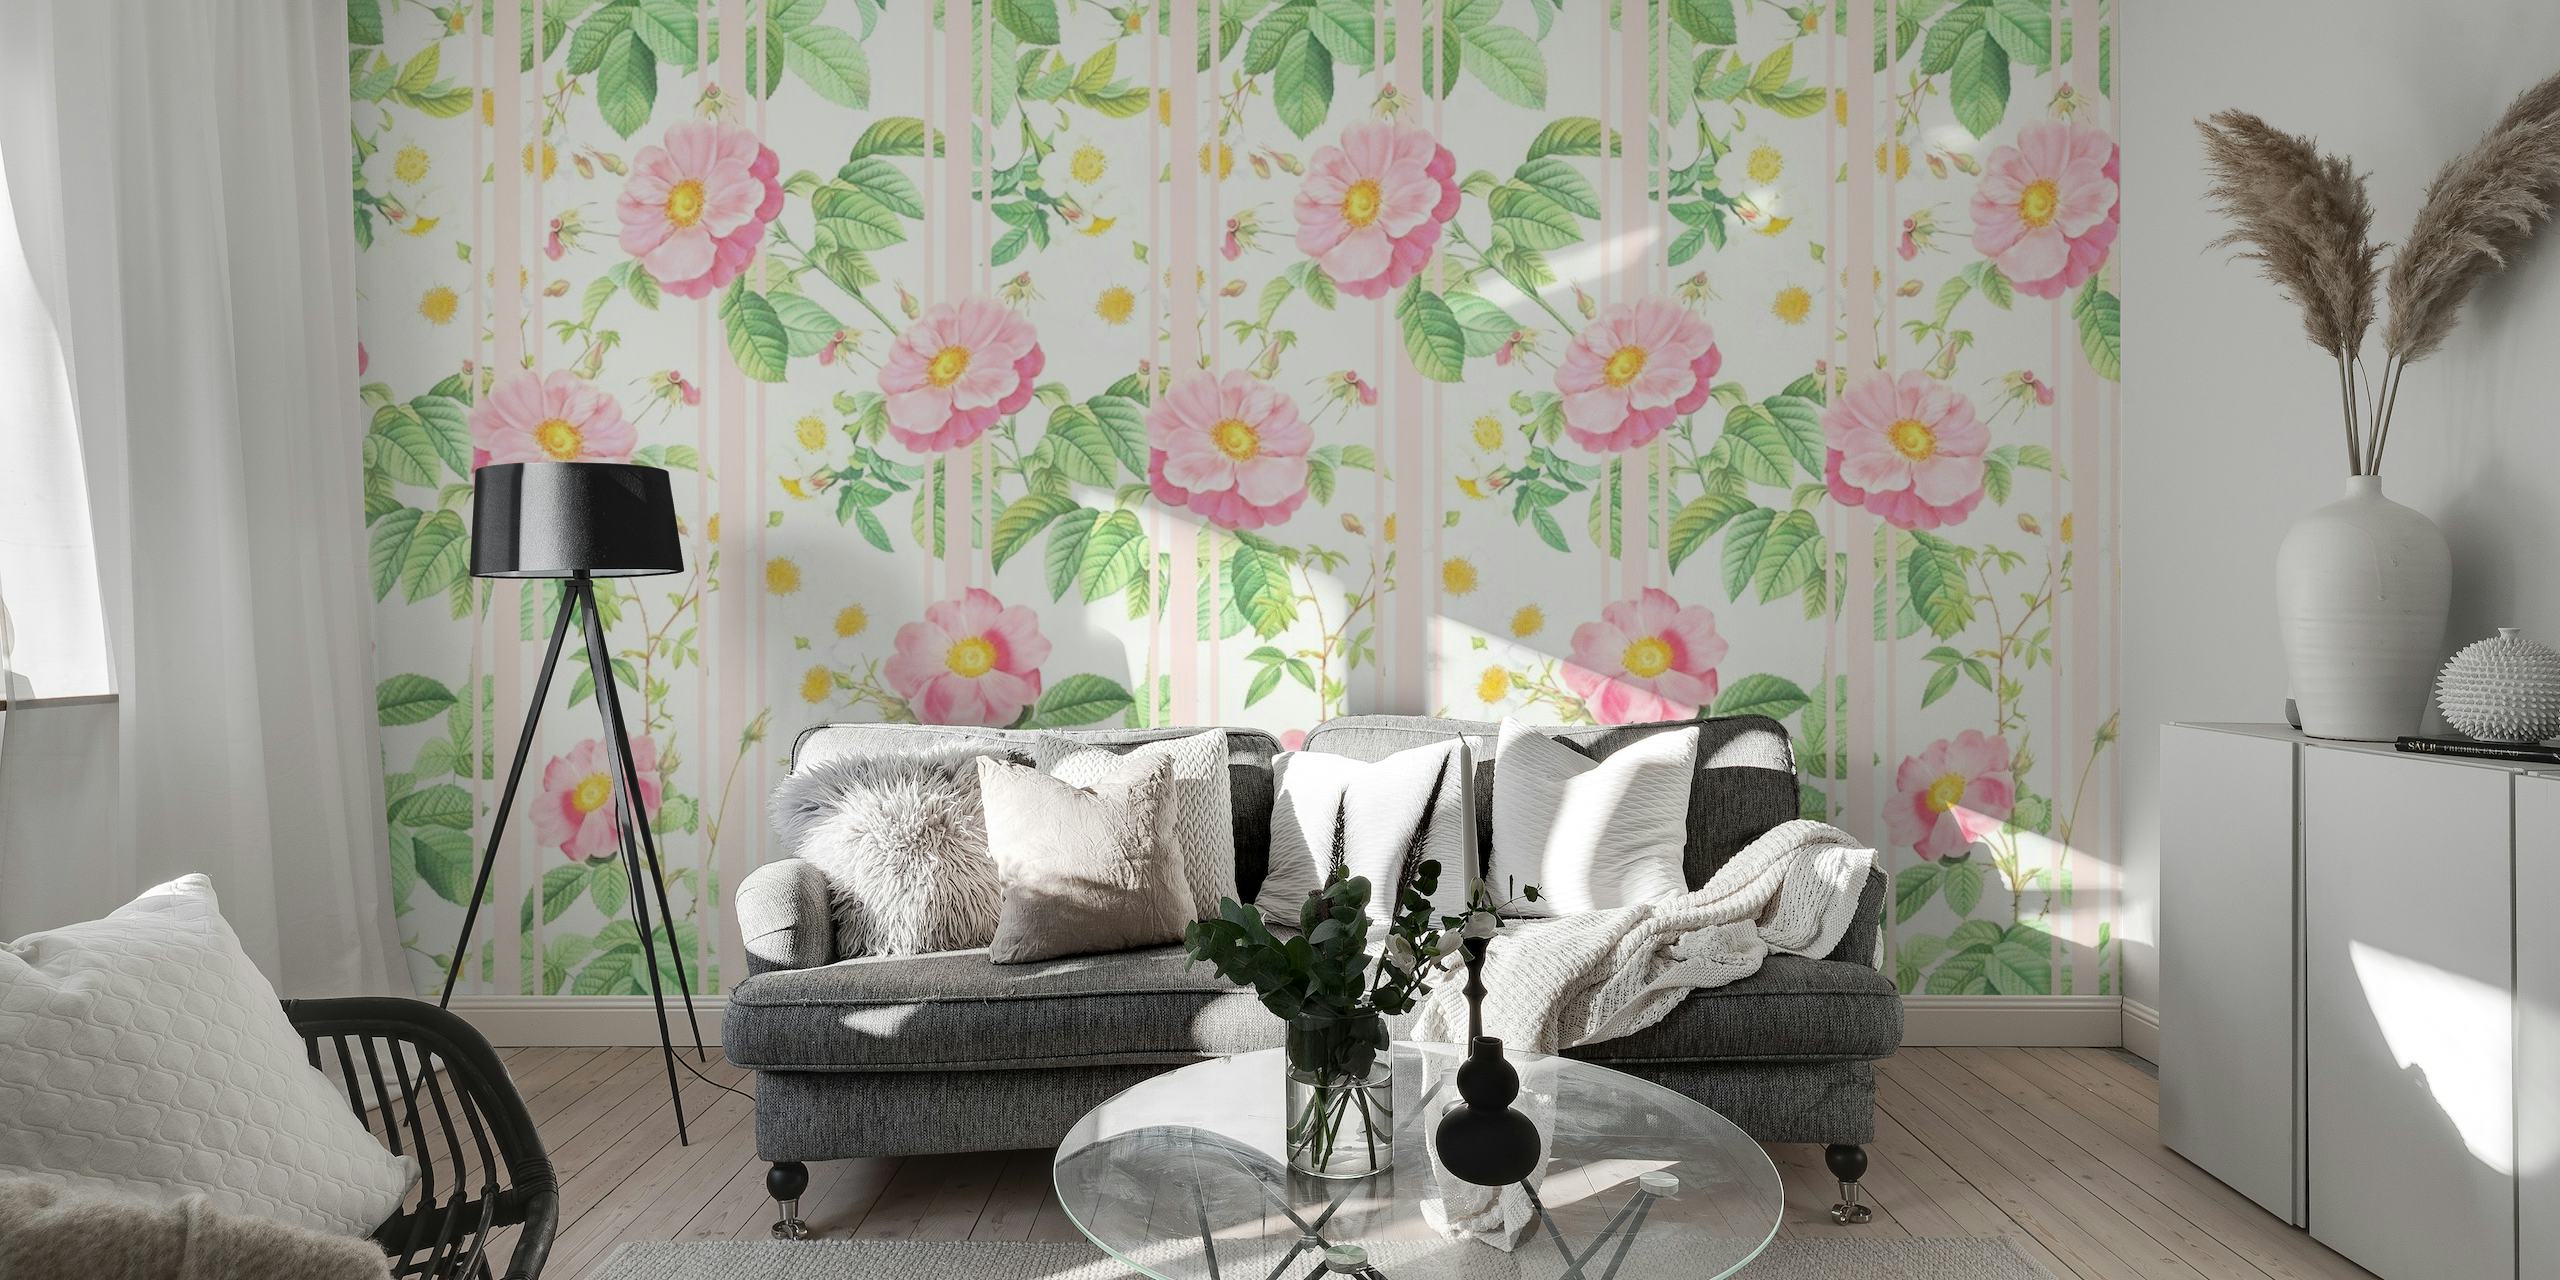 Redoute Roses Garden 3 wall mural with blush-toned roses and green leaves pattern